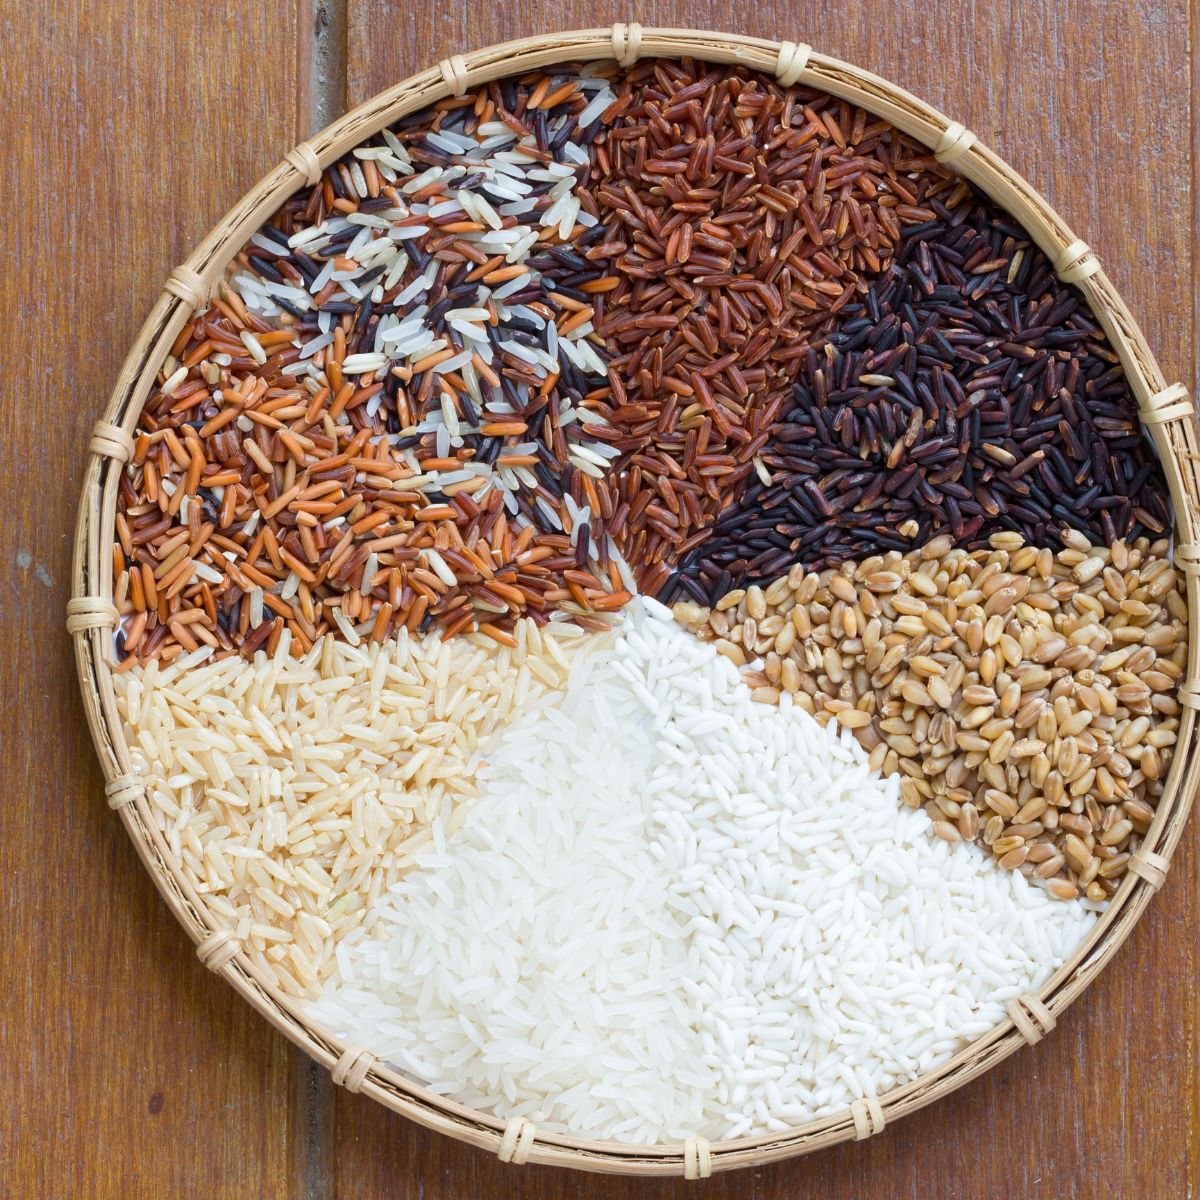 A small basket filled with different types of uncooked rice.